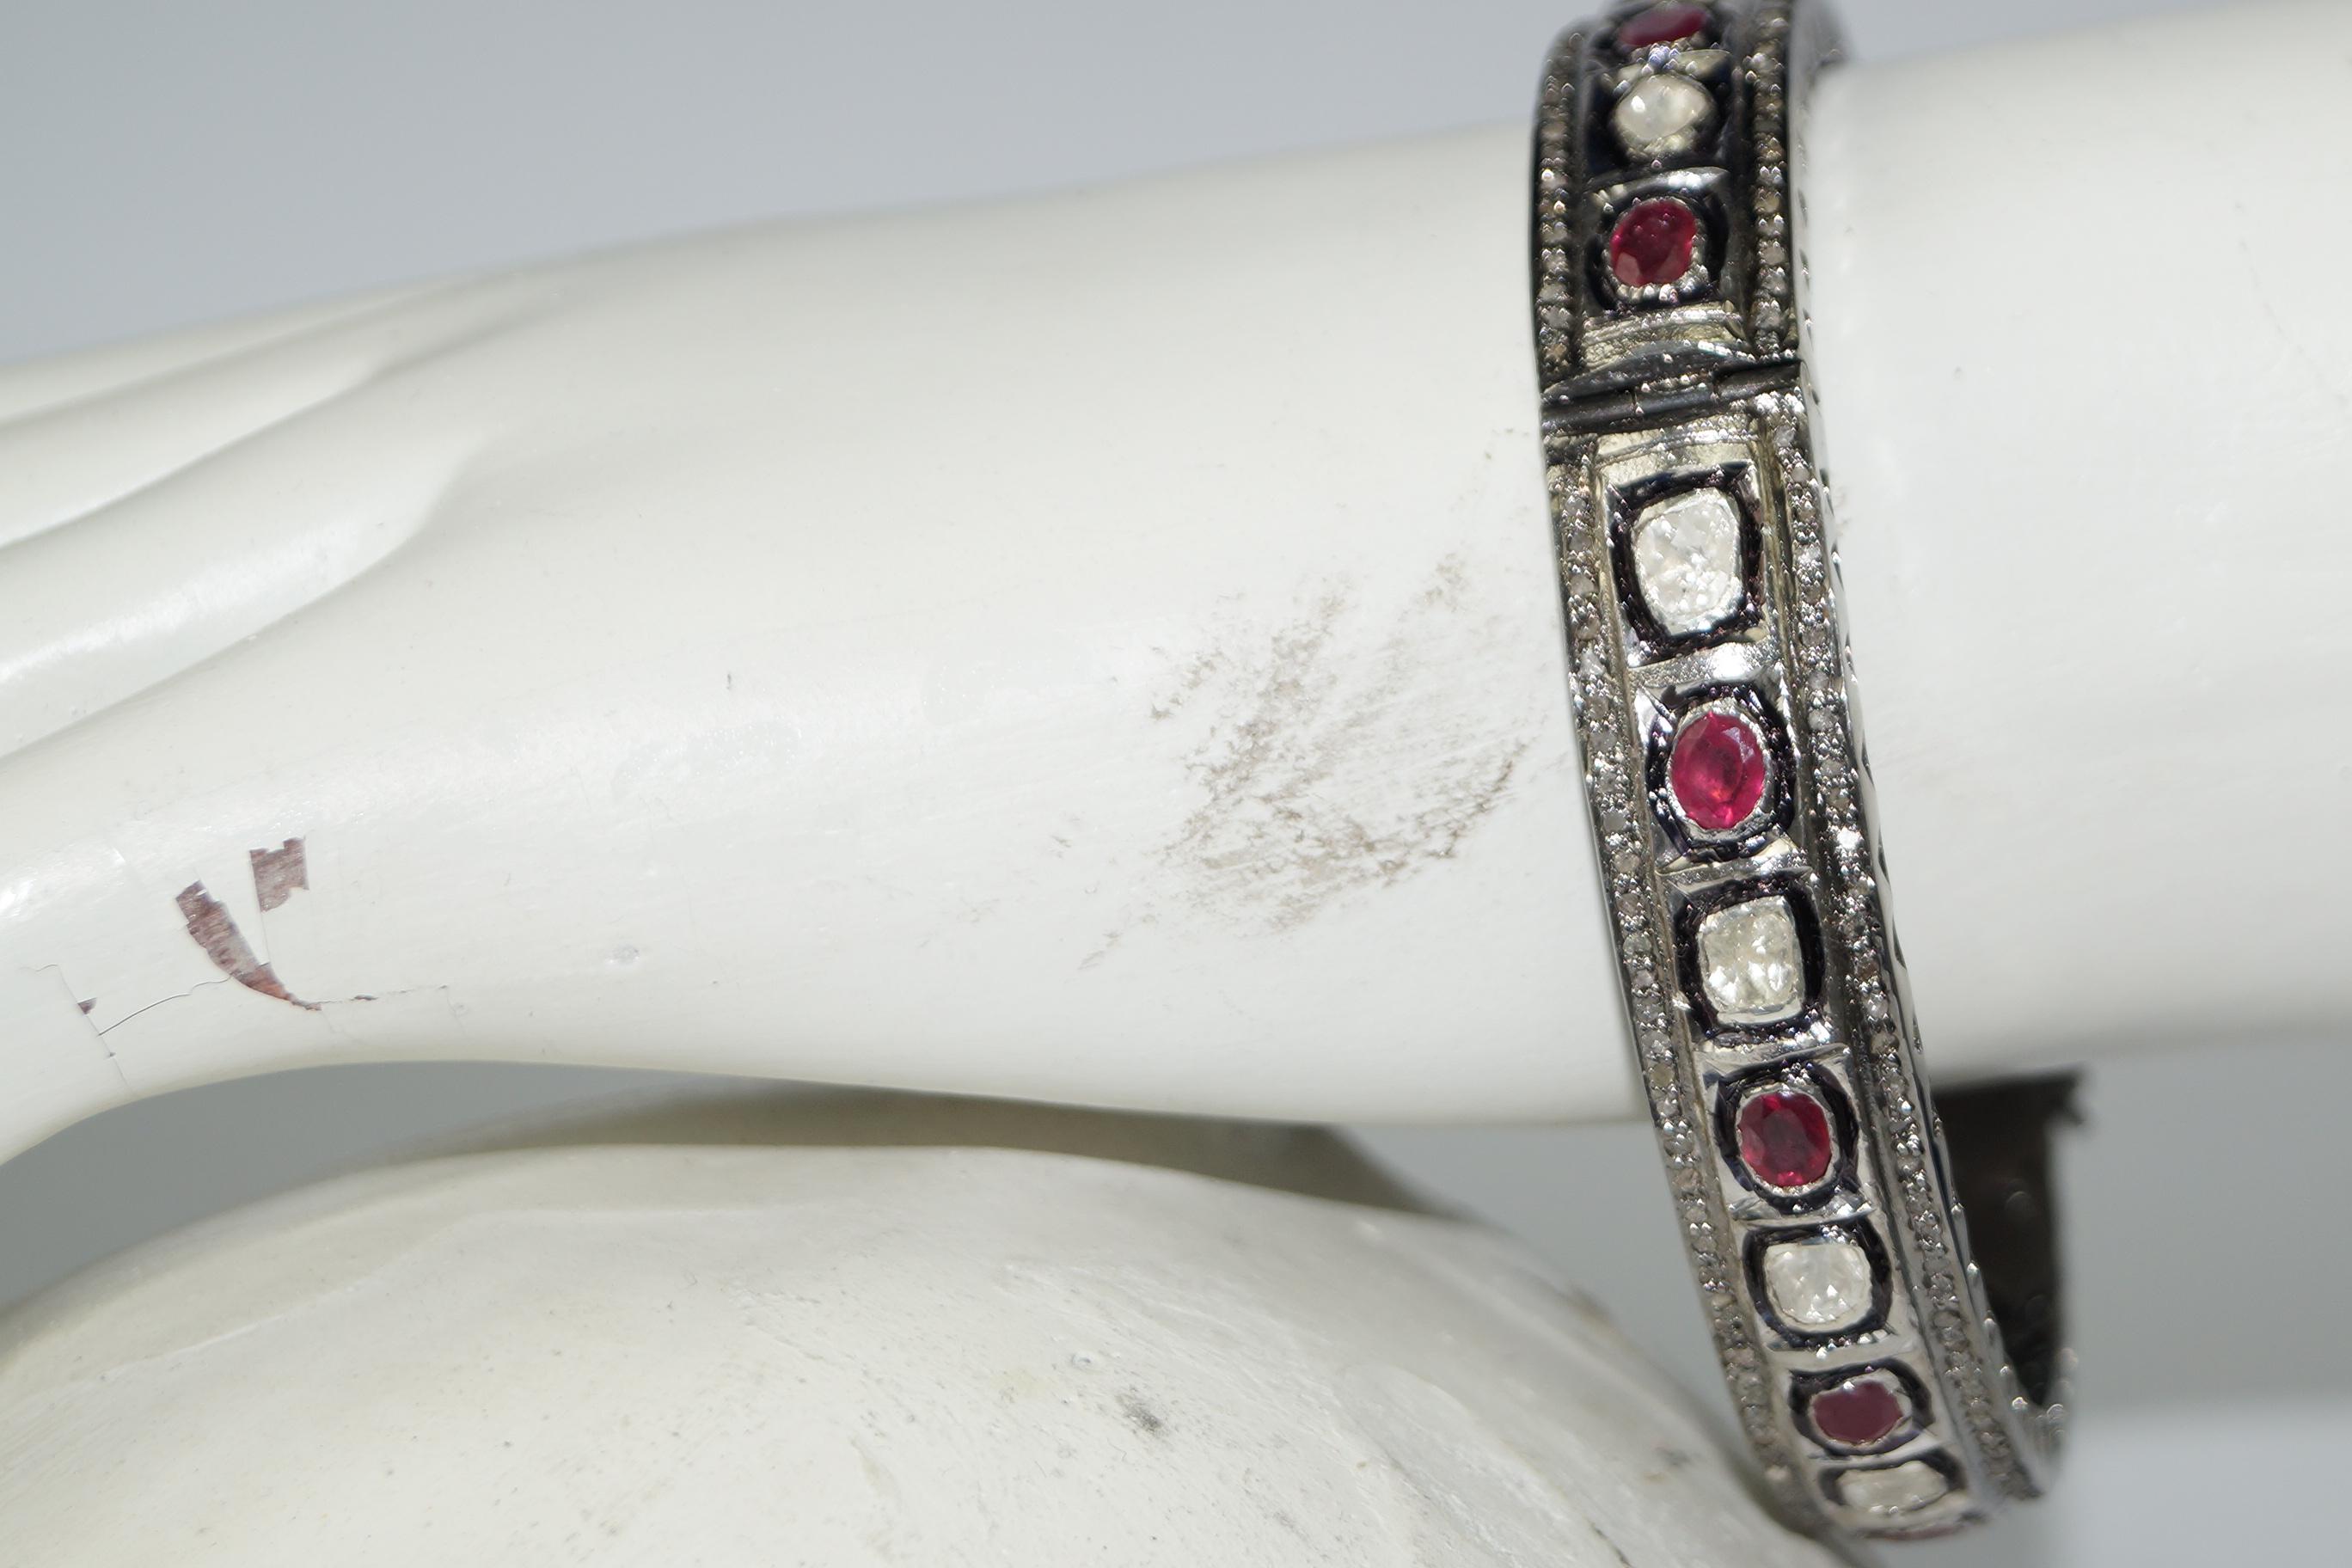 This beautiful retro style diamond oxidized silver ruby bracelet consists of :

Diamond - Rose cut and uncut diamond
Diamond origin- Natural
Diamond weight- 3.88cts

Metal- Silver
Metal purity- 925 (Sterling silver)
Metal color- Oxidized